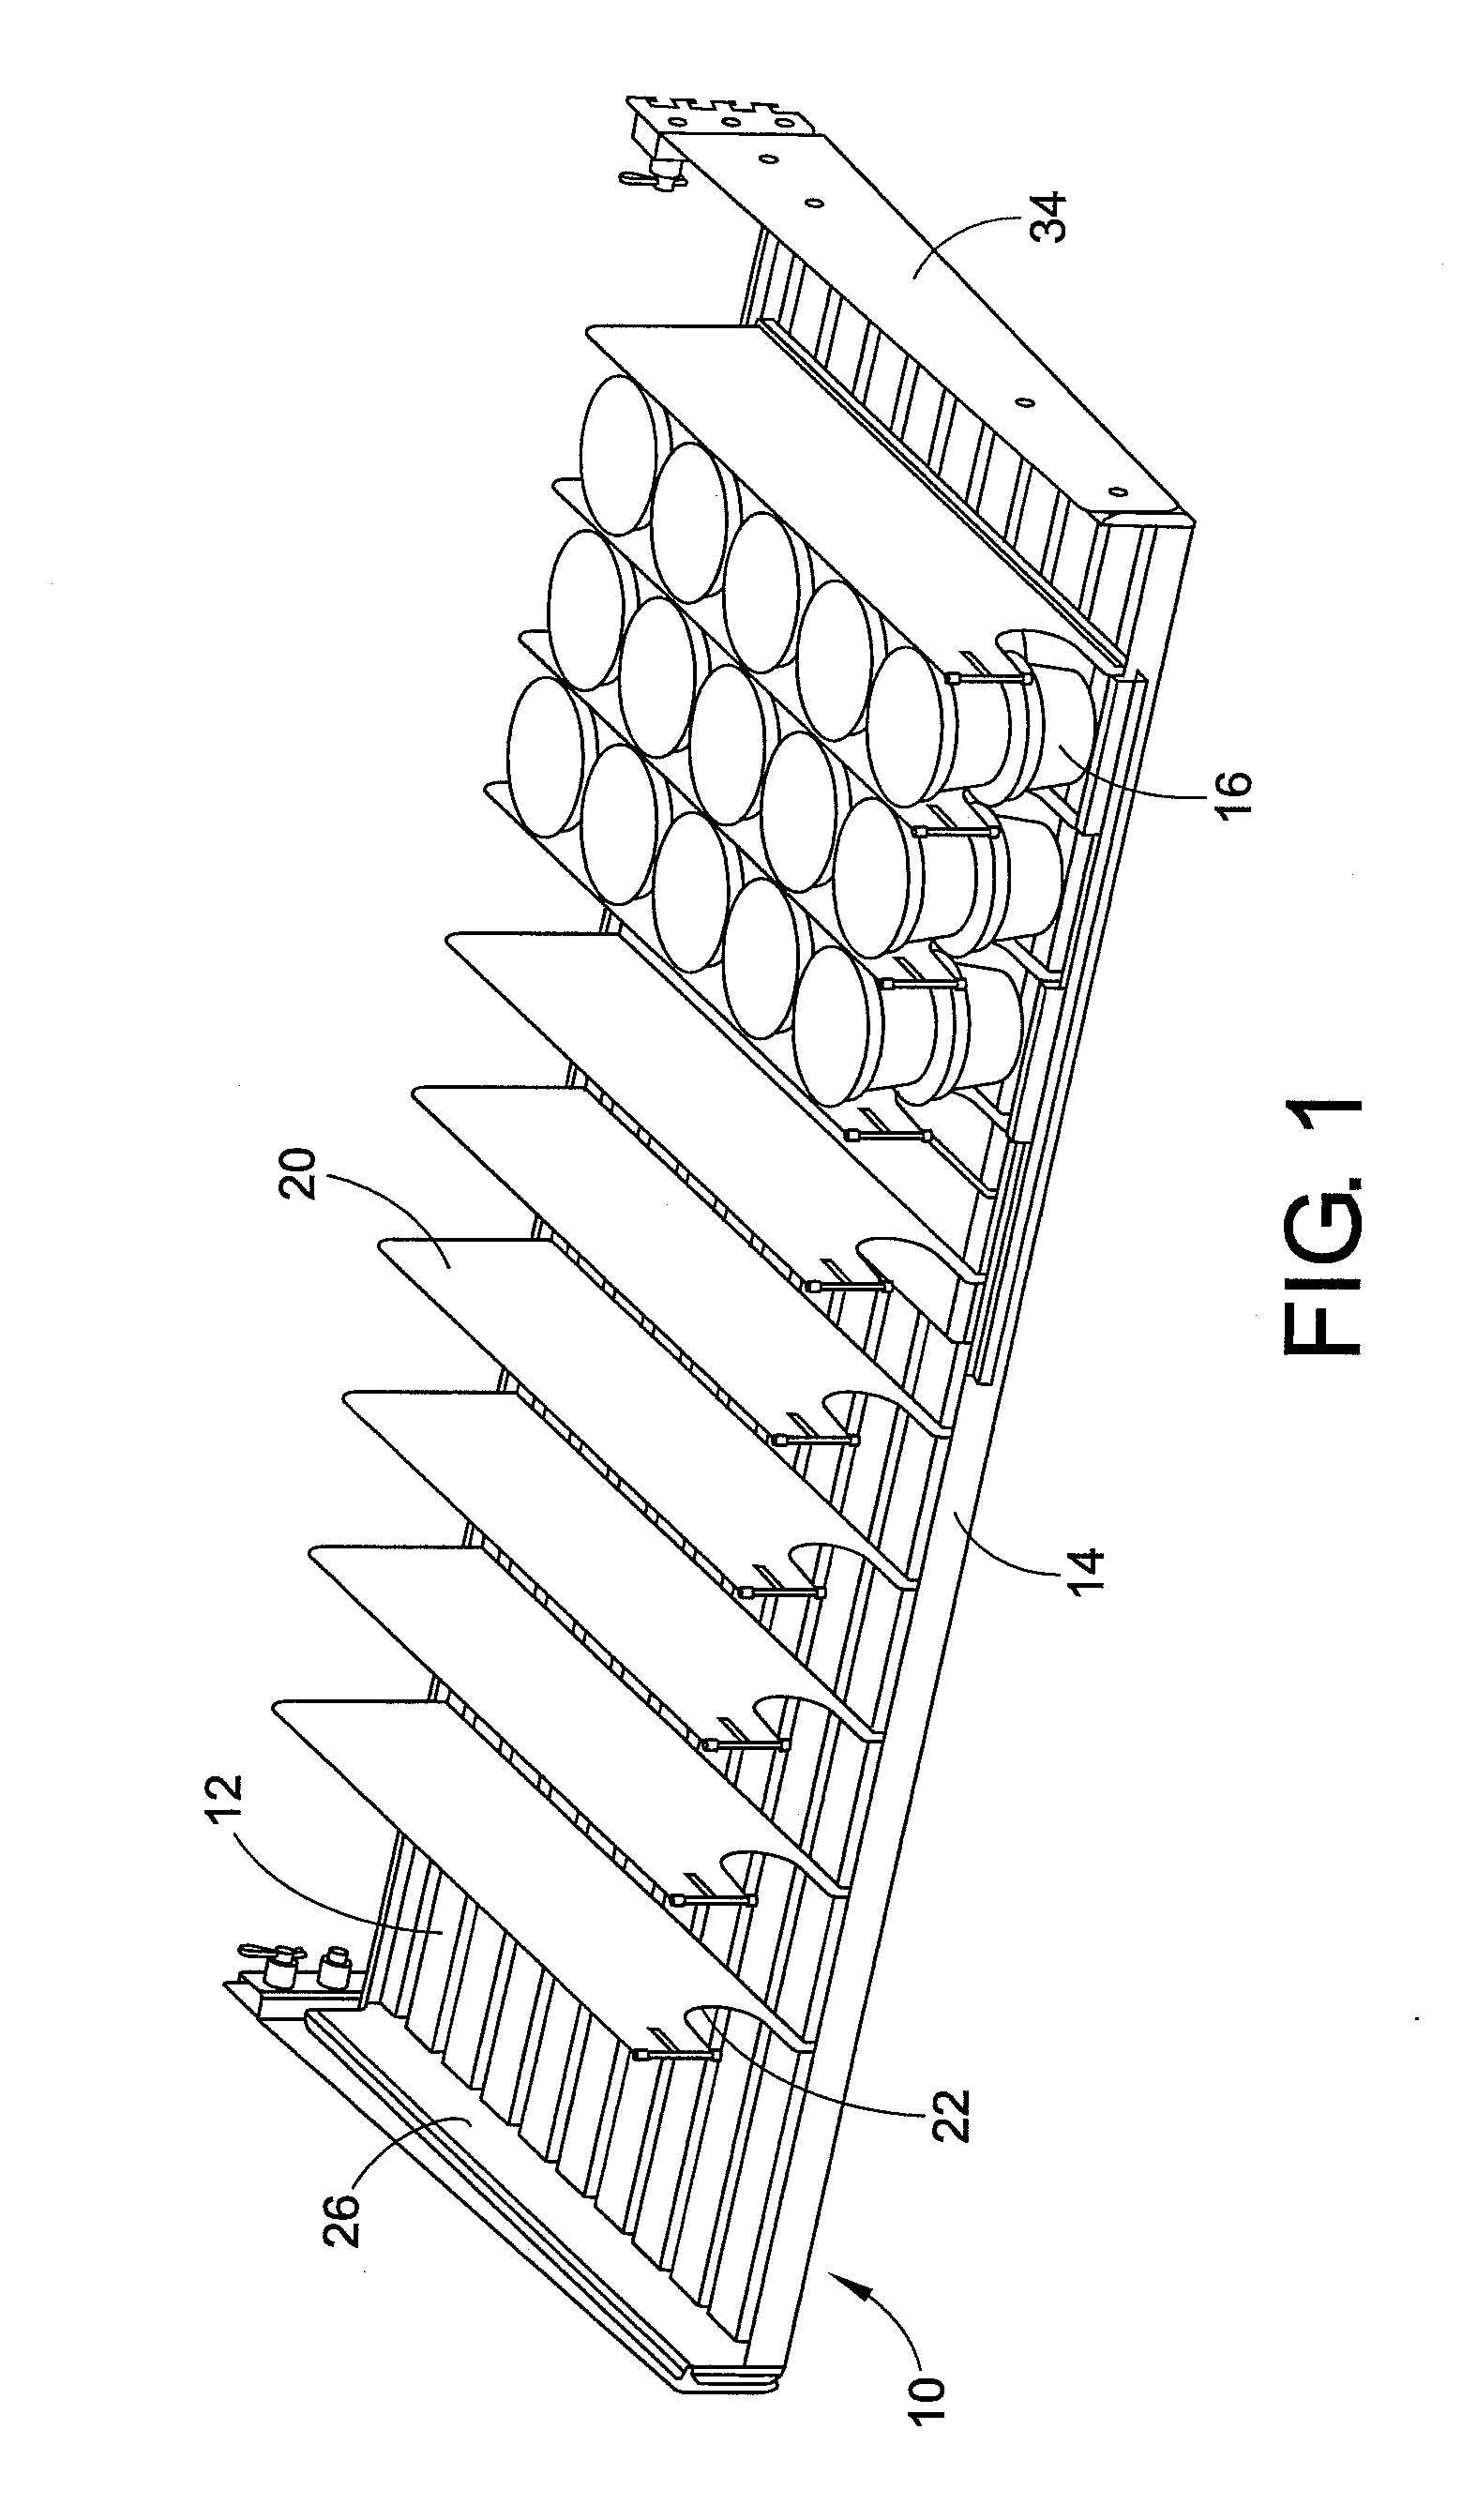 Adjustable mounting structure for a shelving system